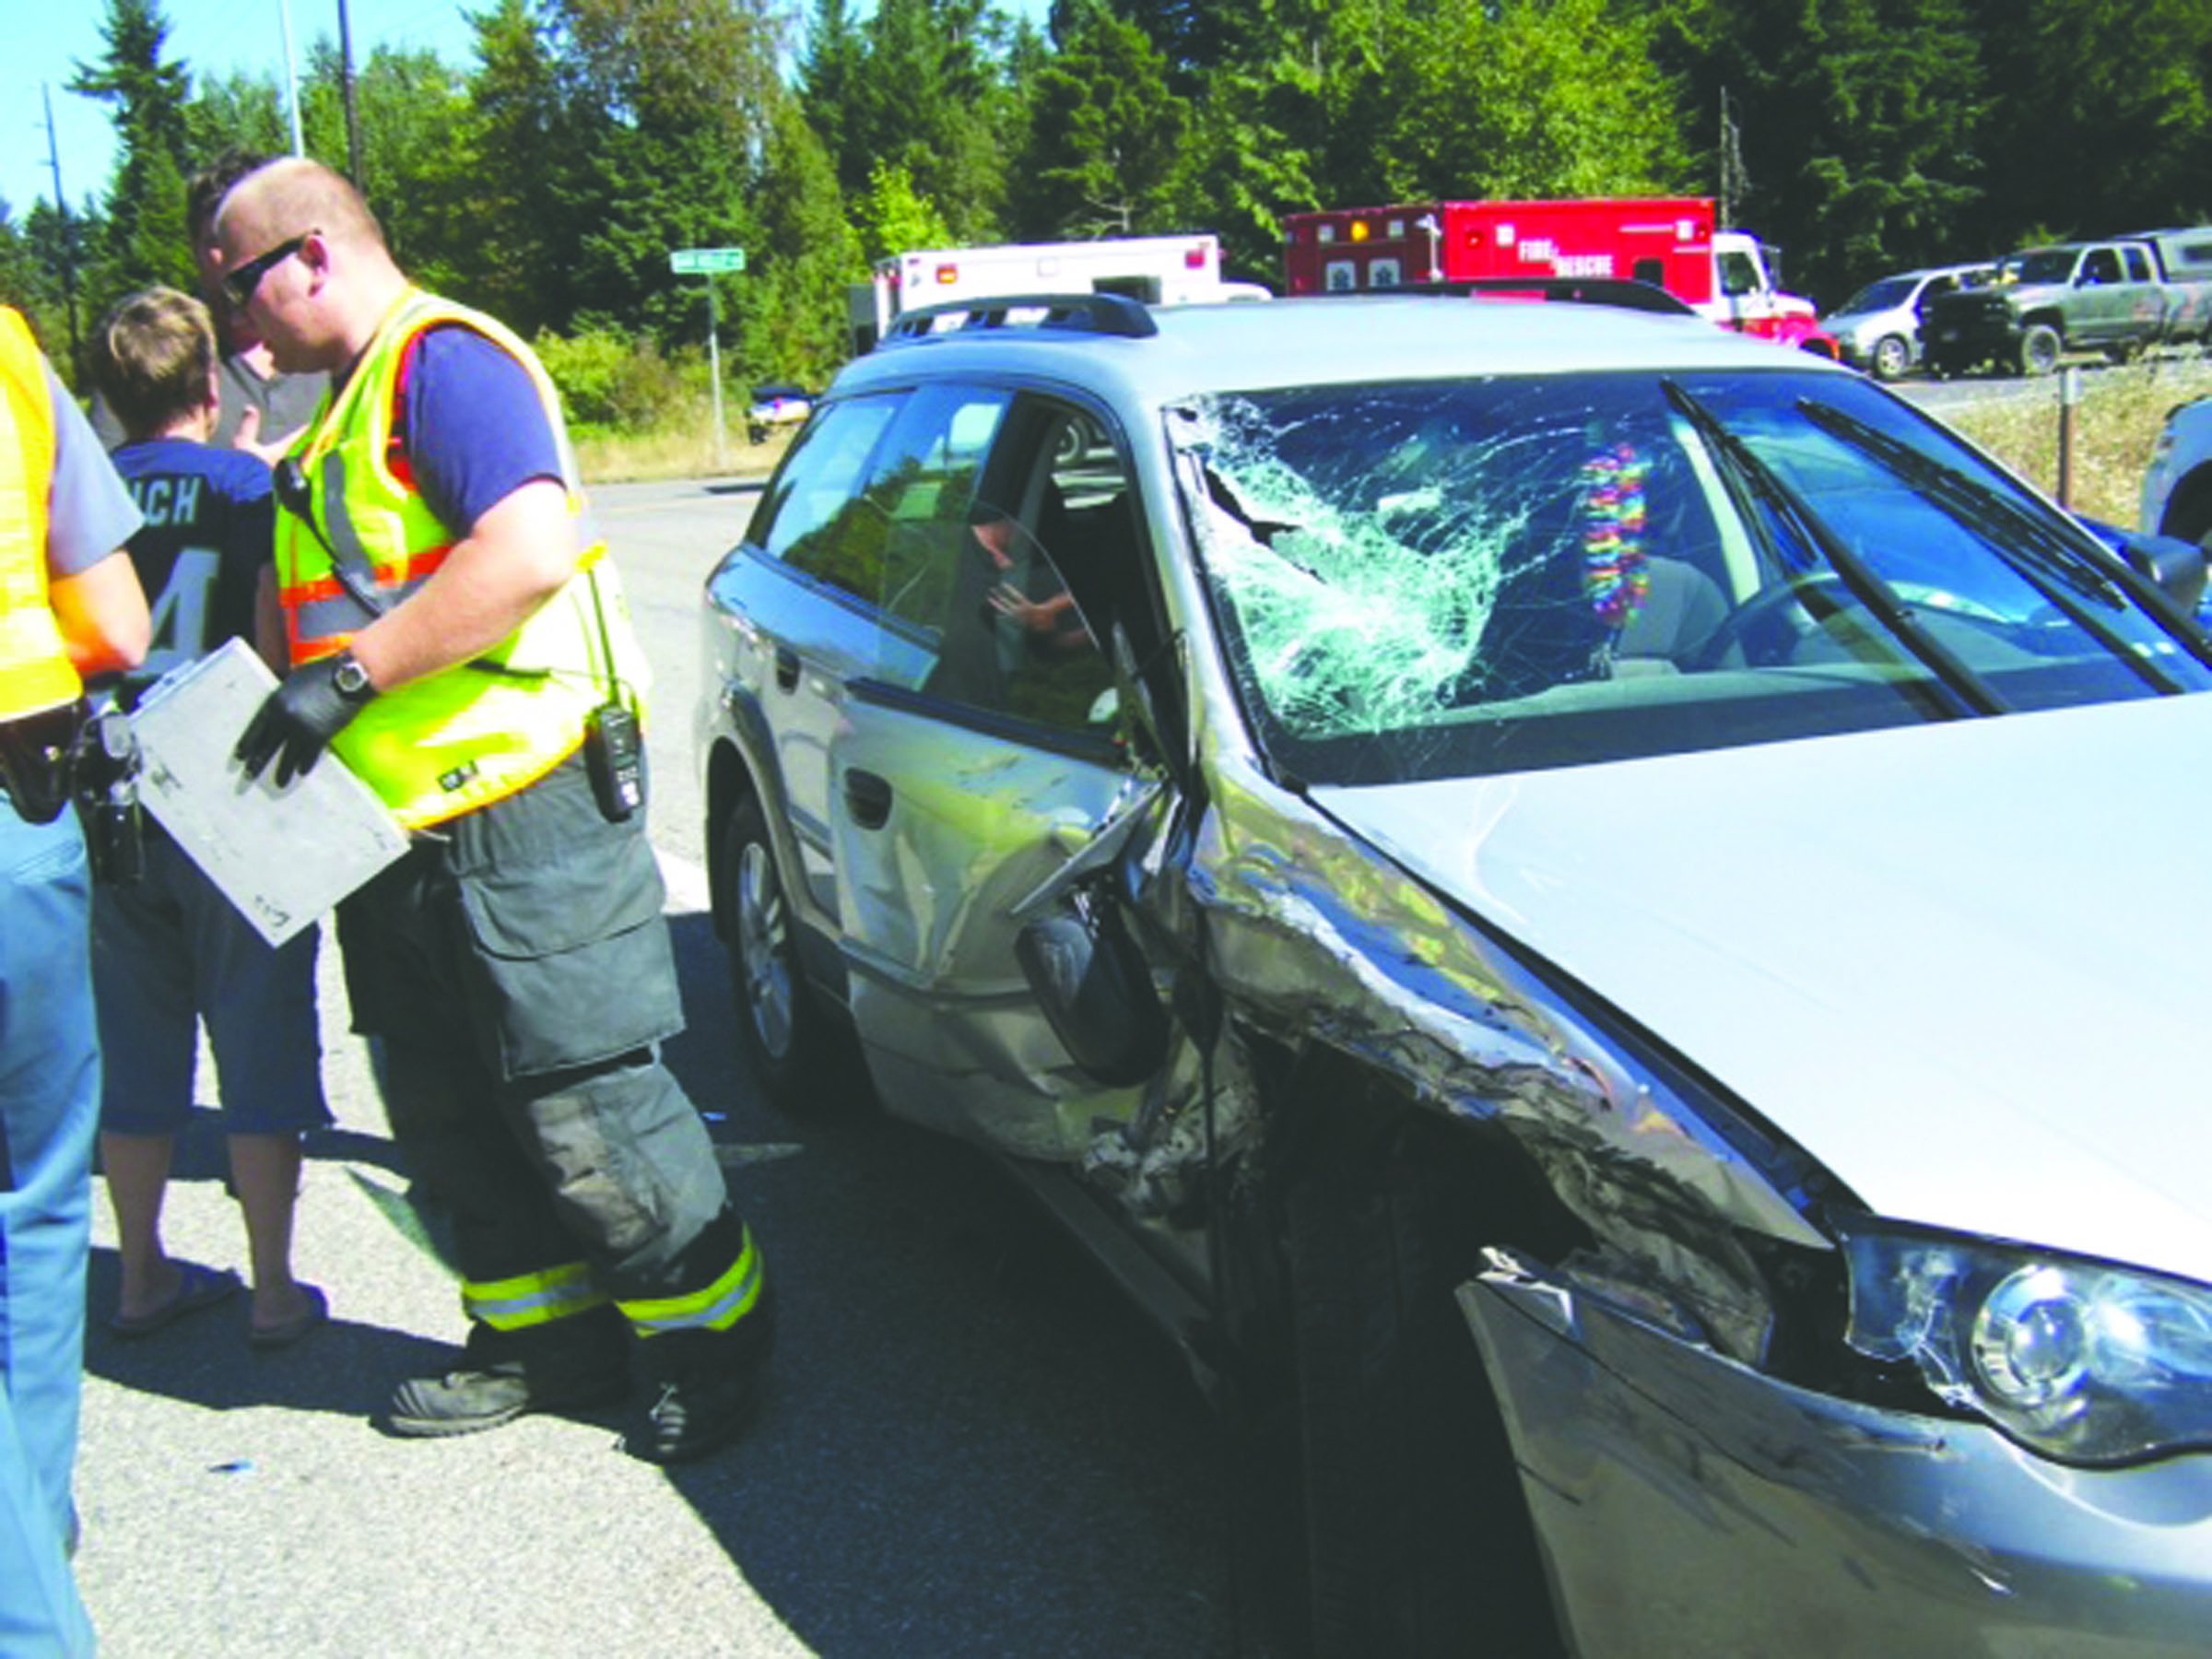 Emergency personnel from Clallam County Fire District discuss a two-vehicle crash that occurred Sunday afternoon at the intersection of Dan Kelly and Place roads with state Highway 112. Drivers of both vehicles were treated and released at the scene. — Clallam County Fire District No. 2